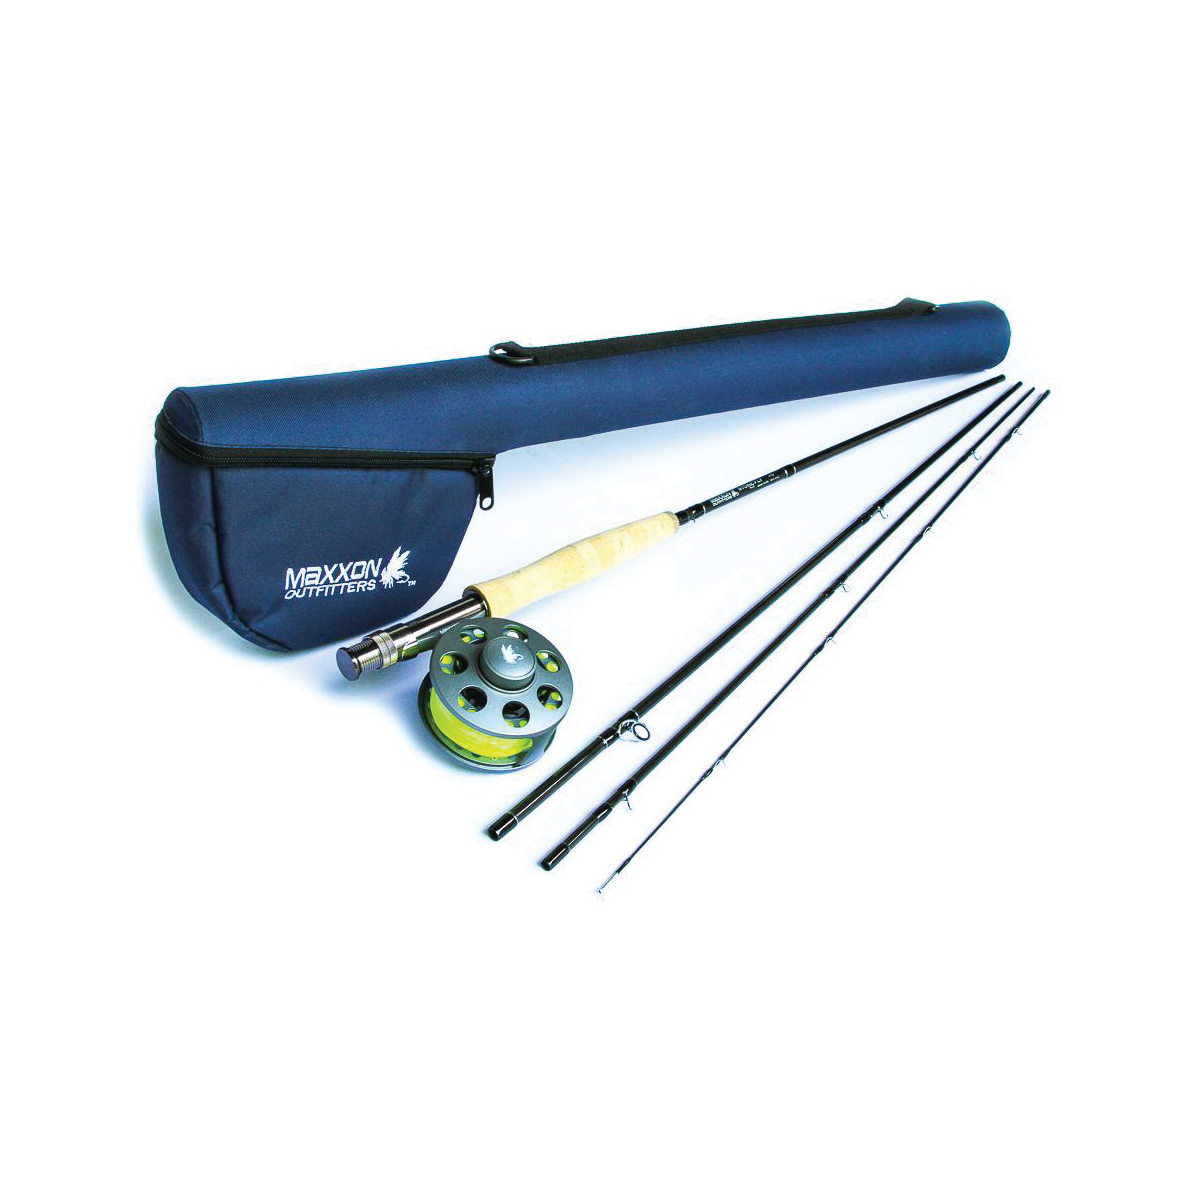 Maxxon Outfitters Fly Series MO4C-P-SF4 Rod/Reel/Line and Case Combo, 3/4 Reel, 8-1/2 ft L Rod, H Handle, Aluminum - 1